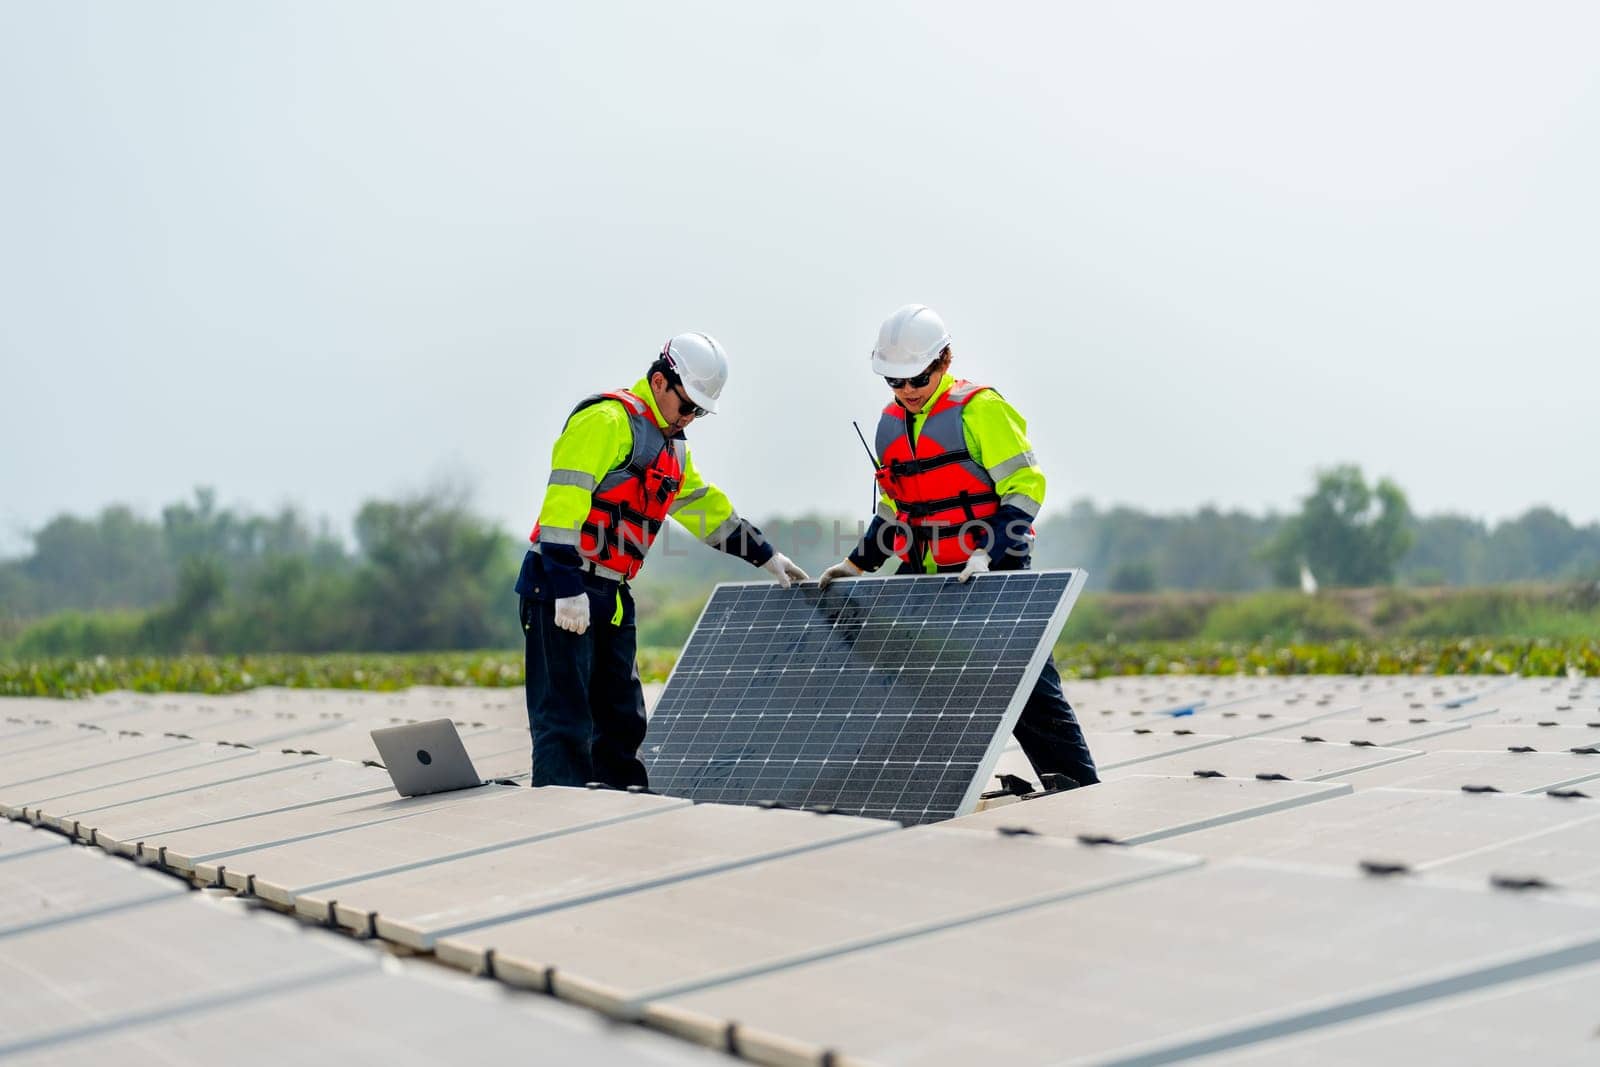 One technician worker stand and hold solar cell panel also work with co-worker who stand and touch to check the problem in the network system.